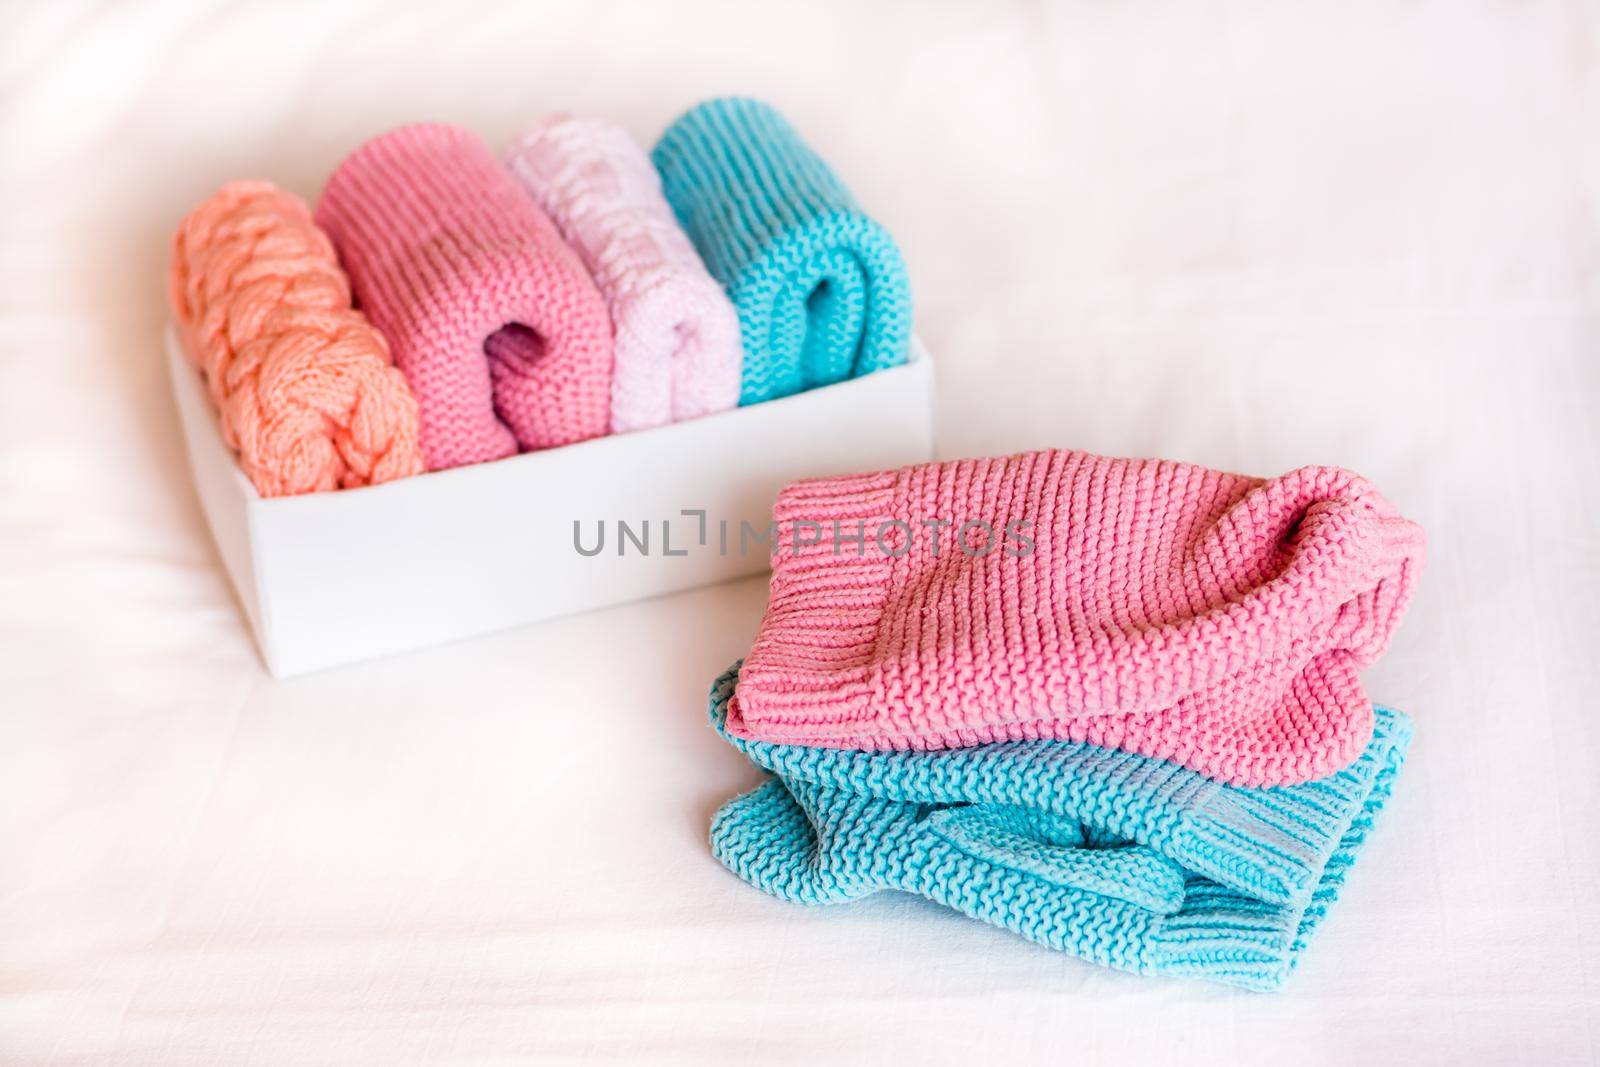 Organization and order. Knitted clothes lie next to a box of neatly folded things.